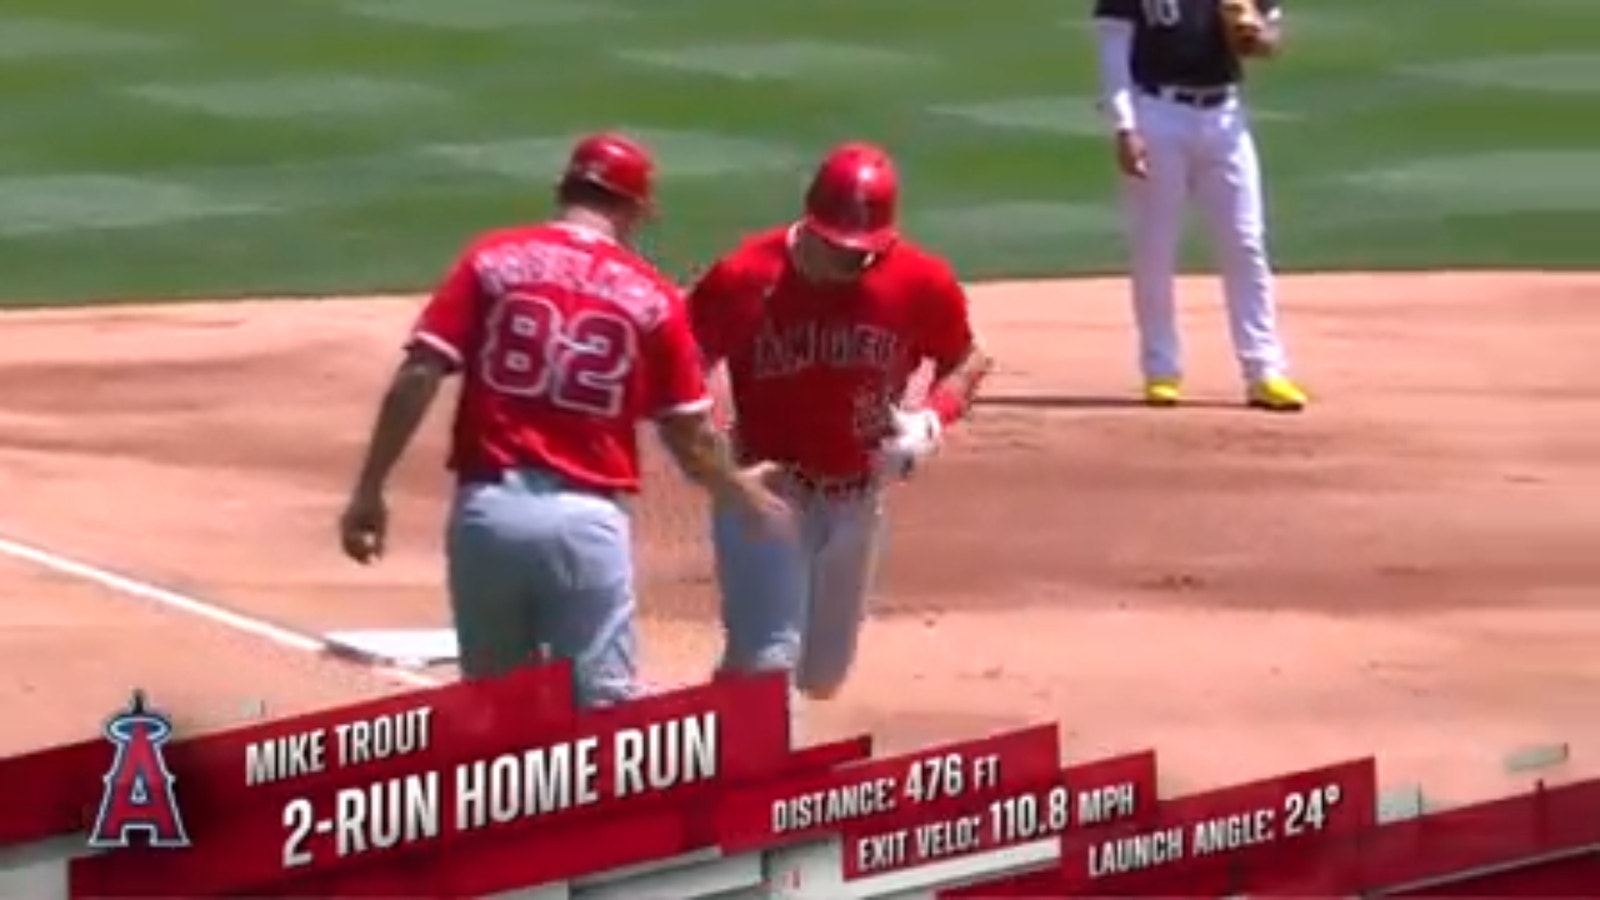 Mike Trout smashes 476-foot home run, giving Angels 2-0 lead vs. White Sox